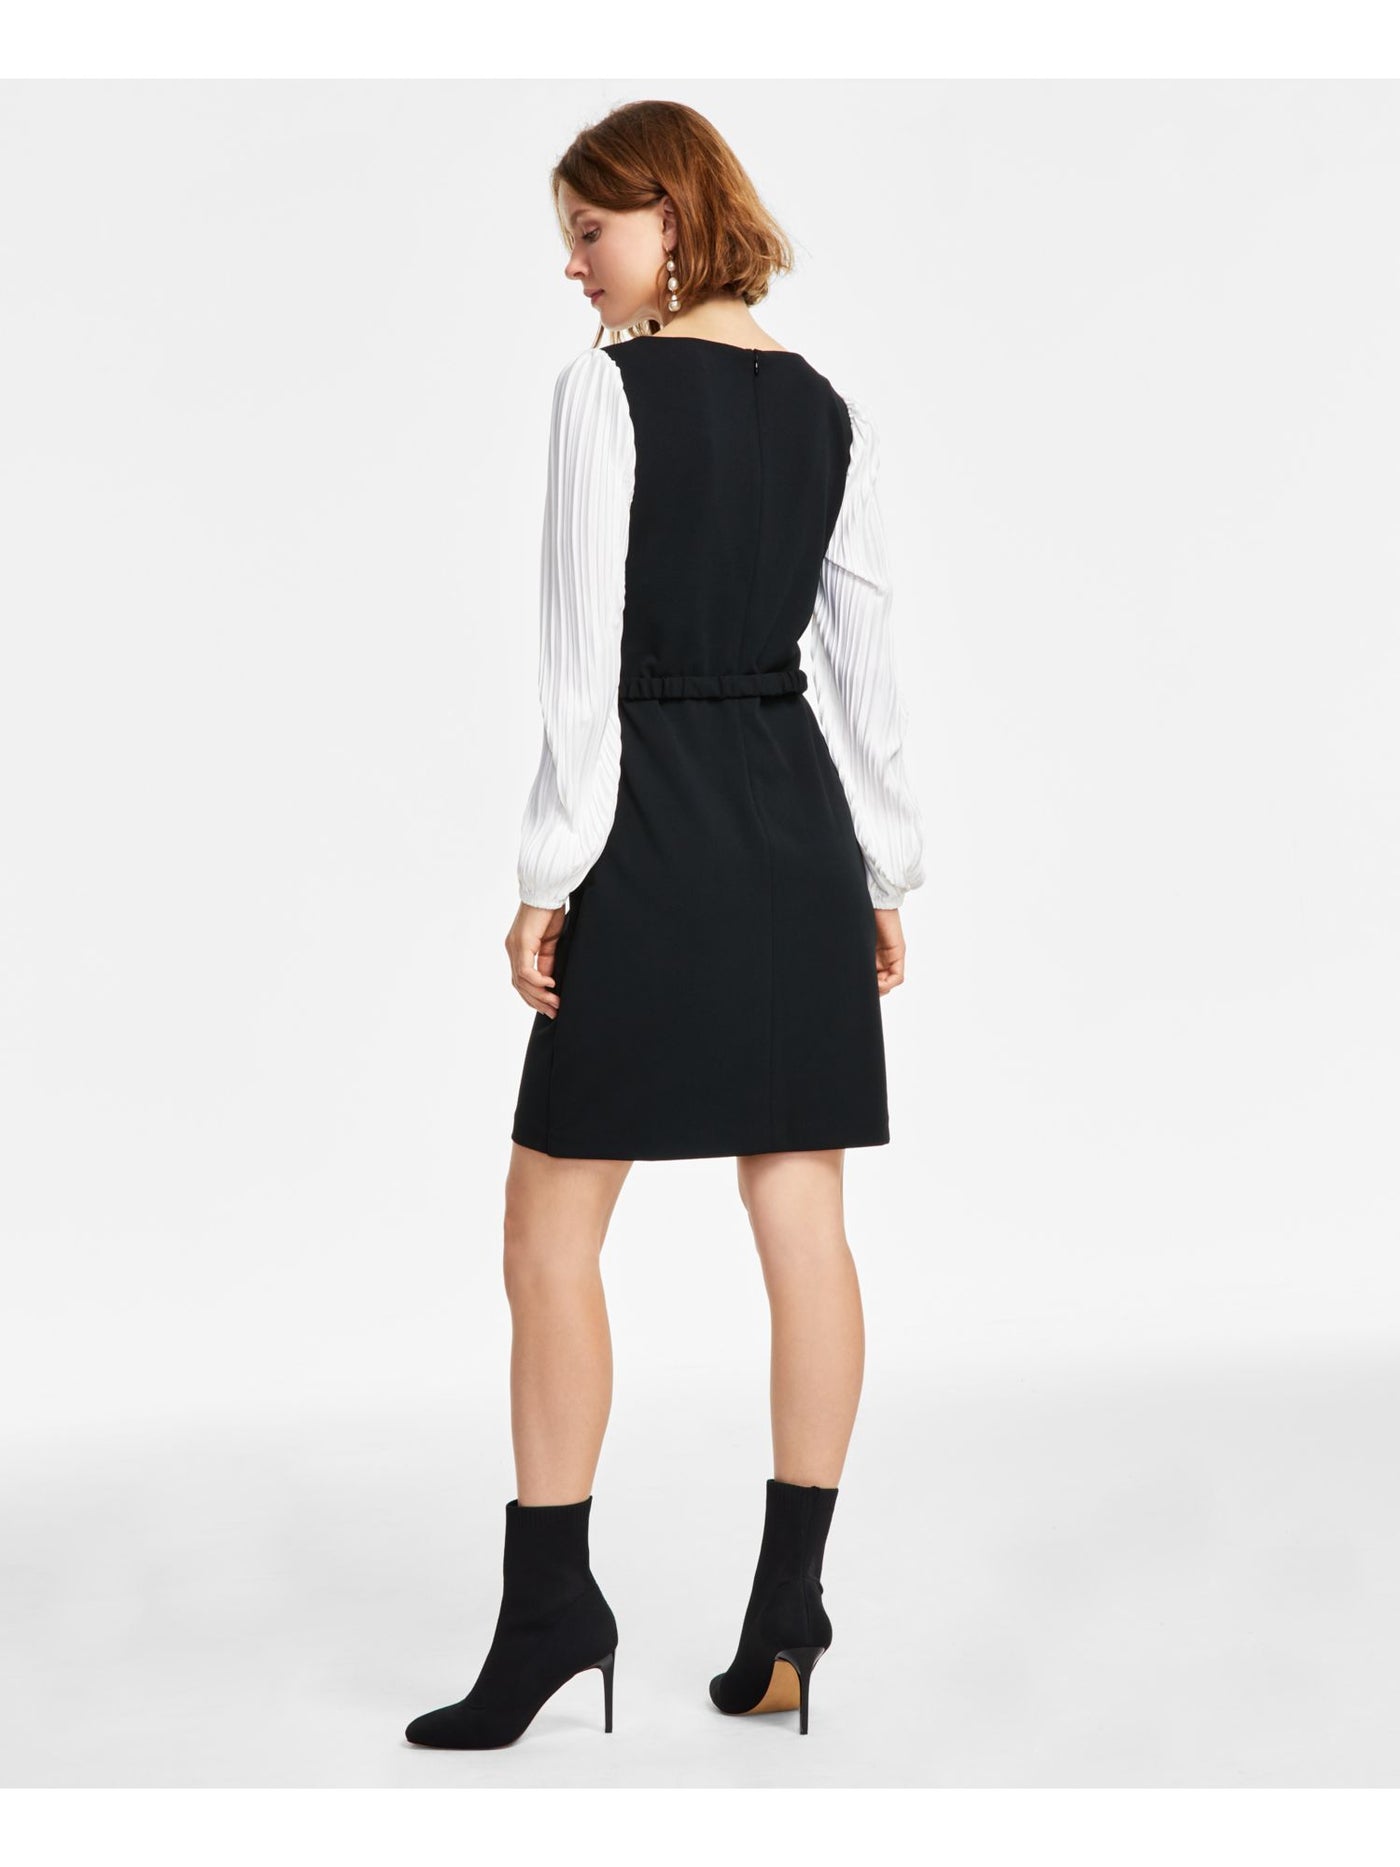 DKNY Womens Black Zippered Belted Pleated Long Sleeves Color Block Round Neck Above The Knee Wear To Work Sheath Dress 2